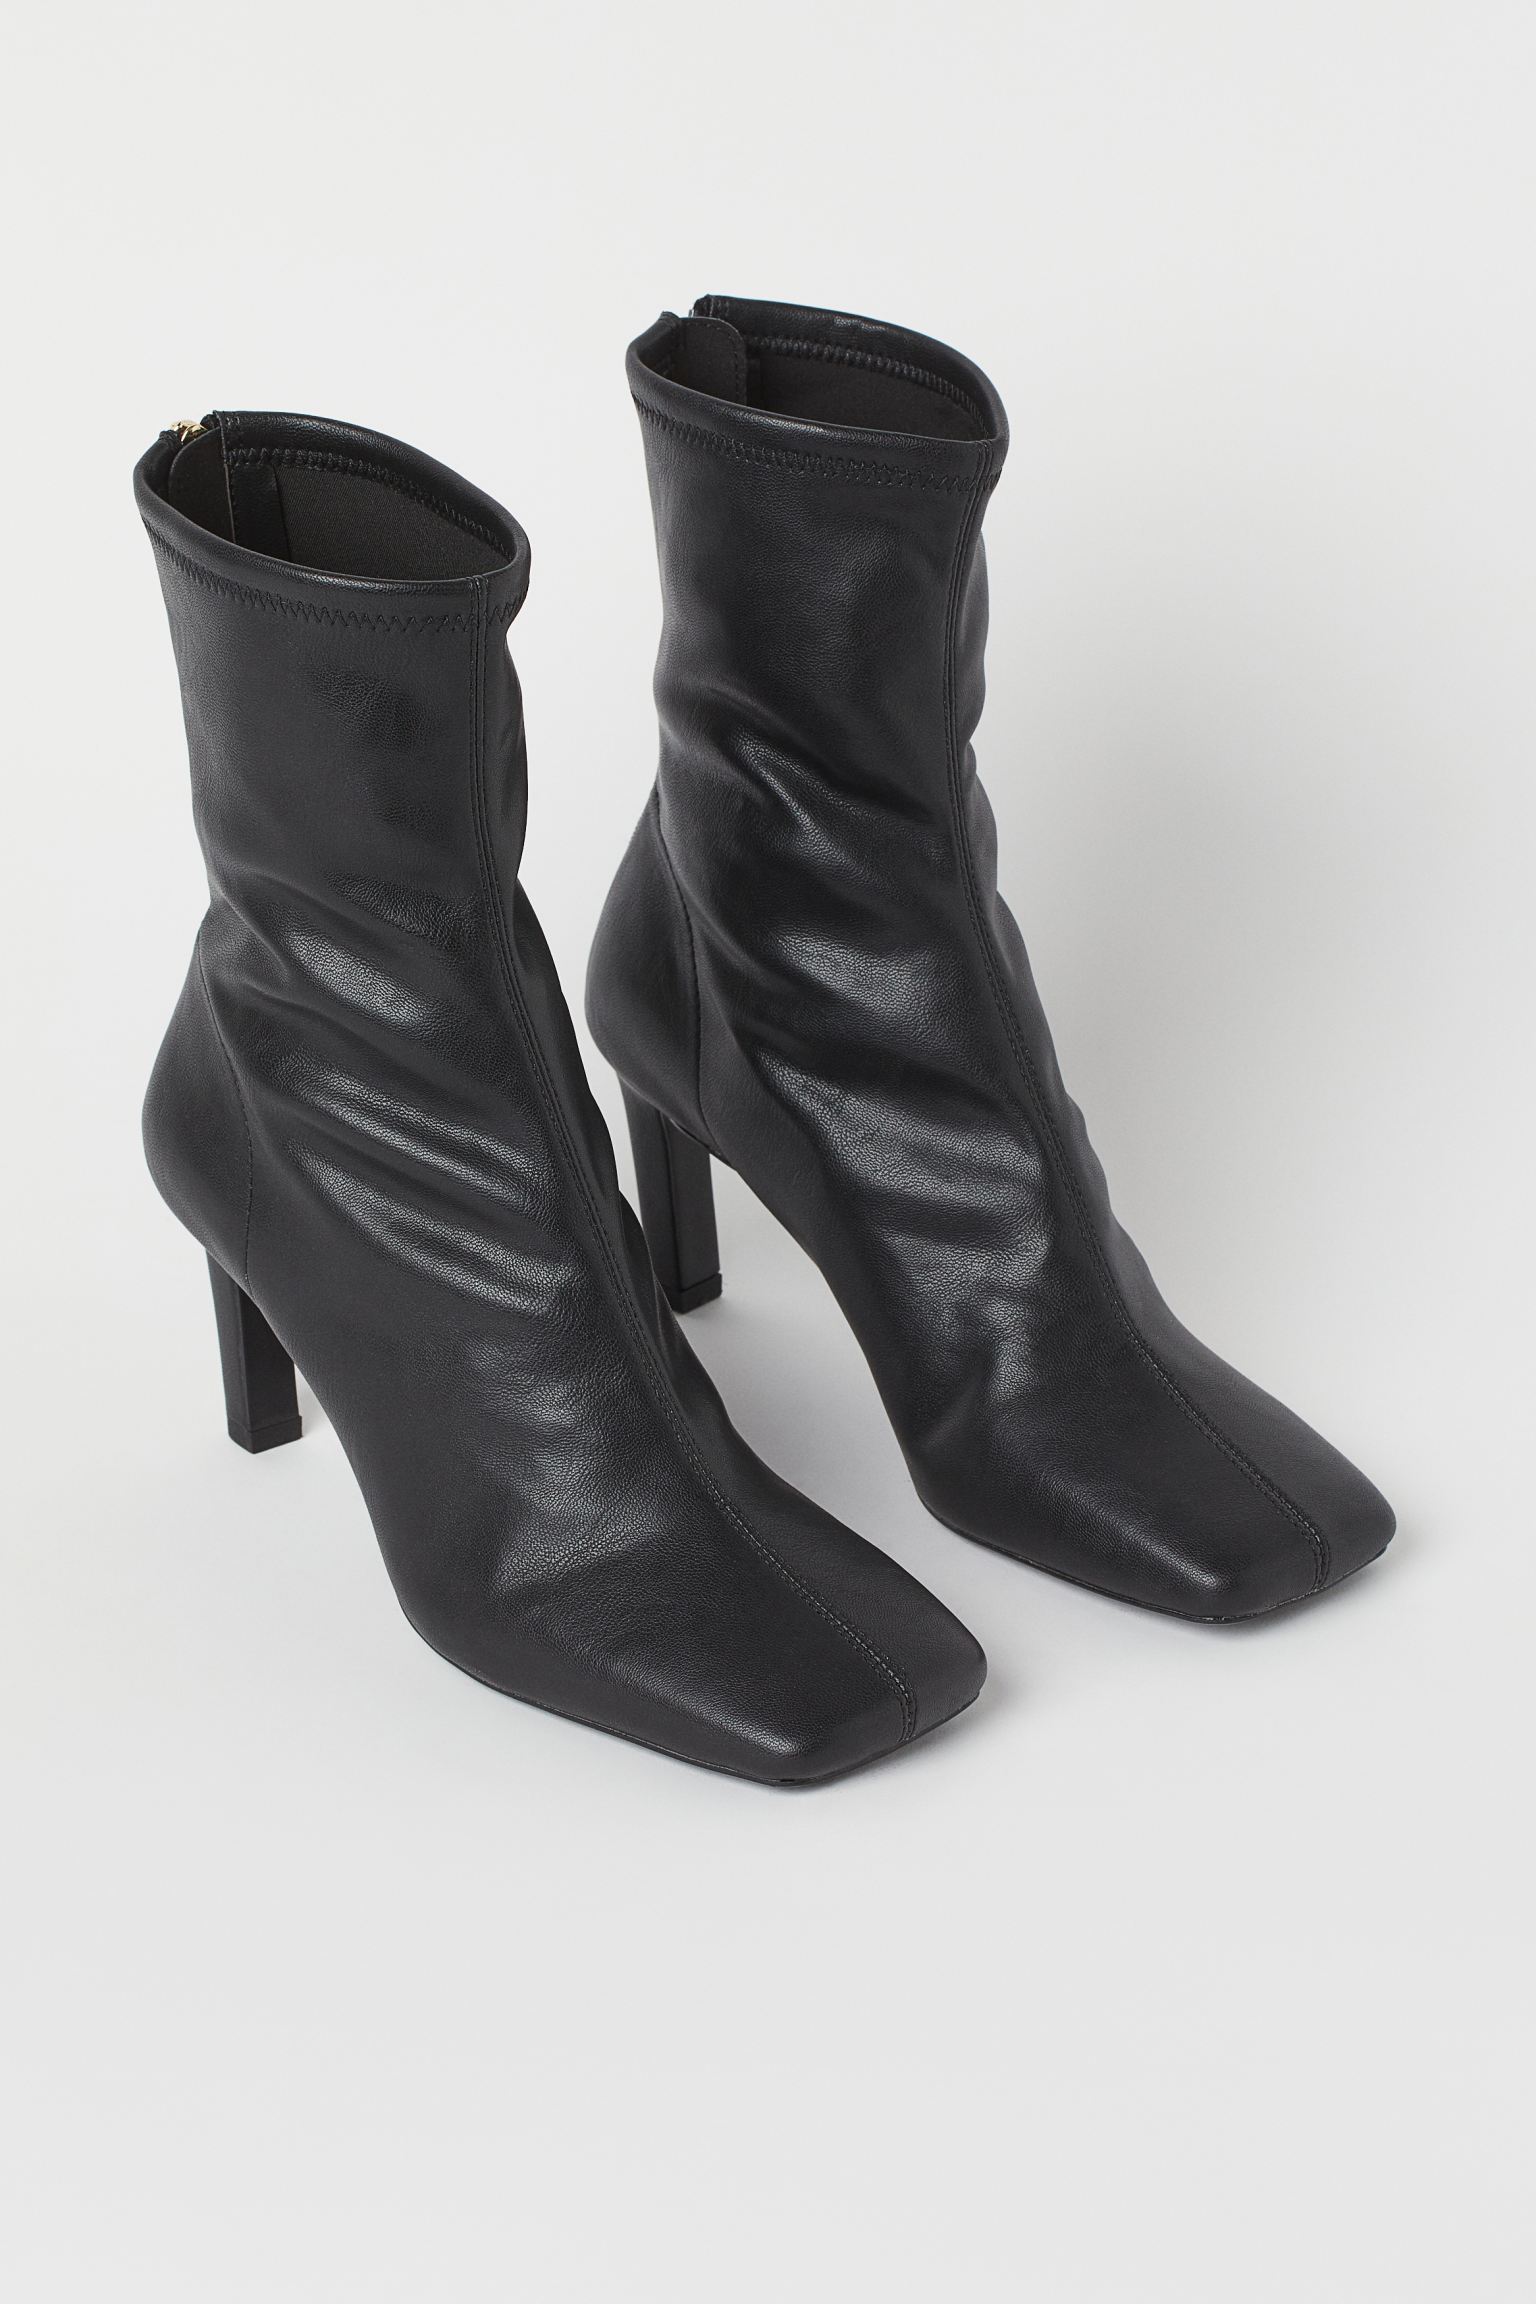 H&M + Square-Toe Ankle Boots